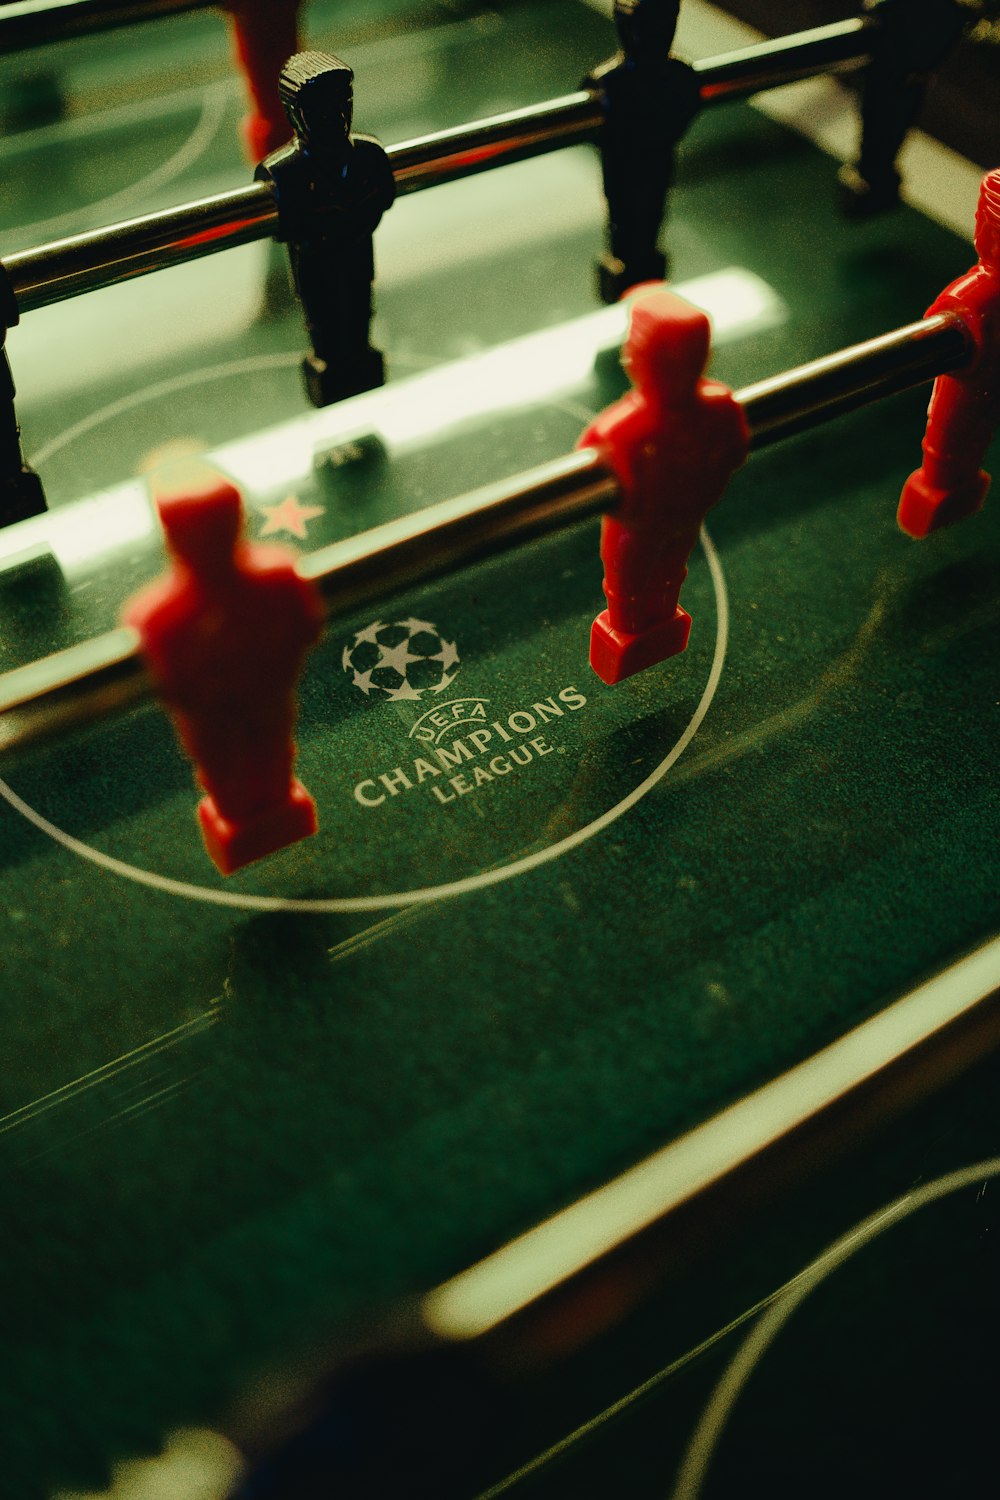 a close up of a foosball table with red foosball figures